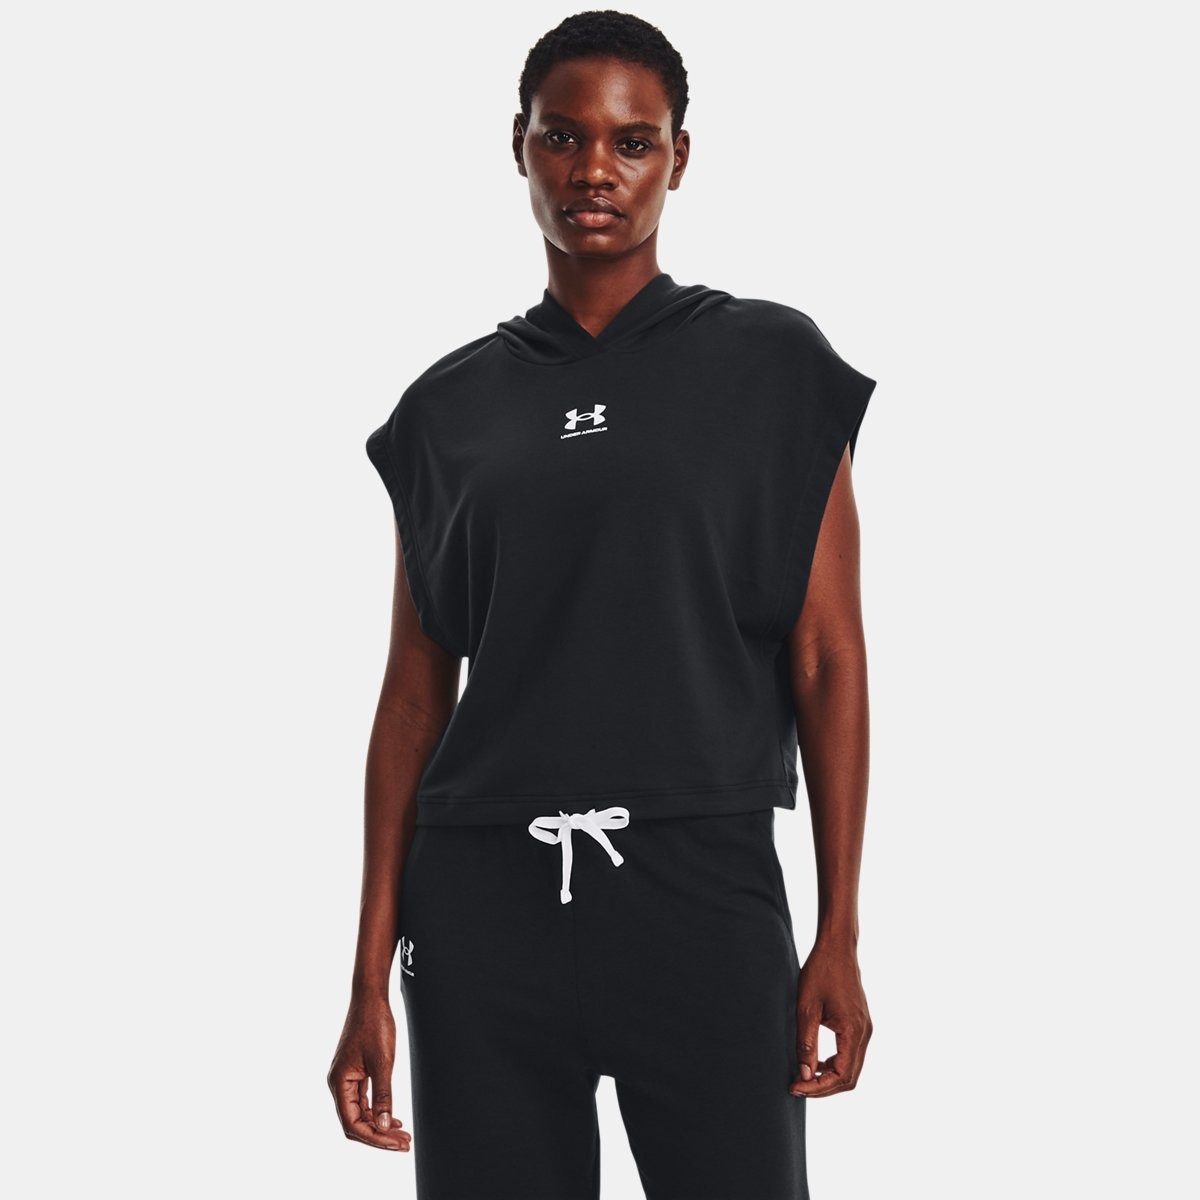 Hoodie in Black - Under Armour Woman - Under Armour GOOFASH